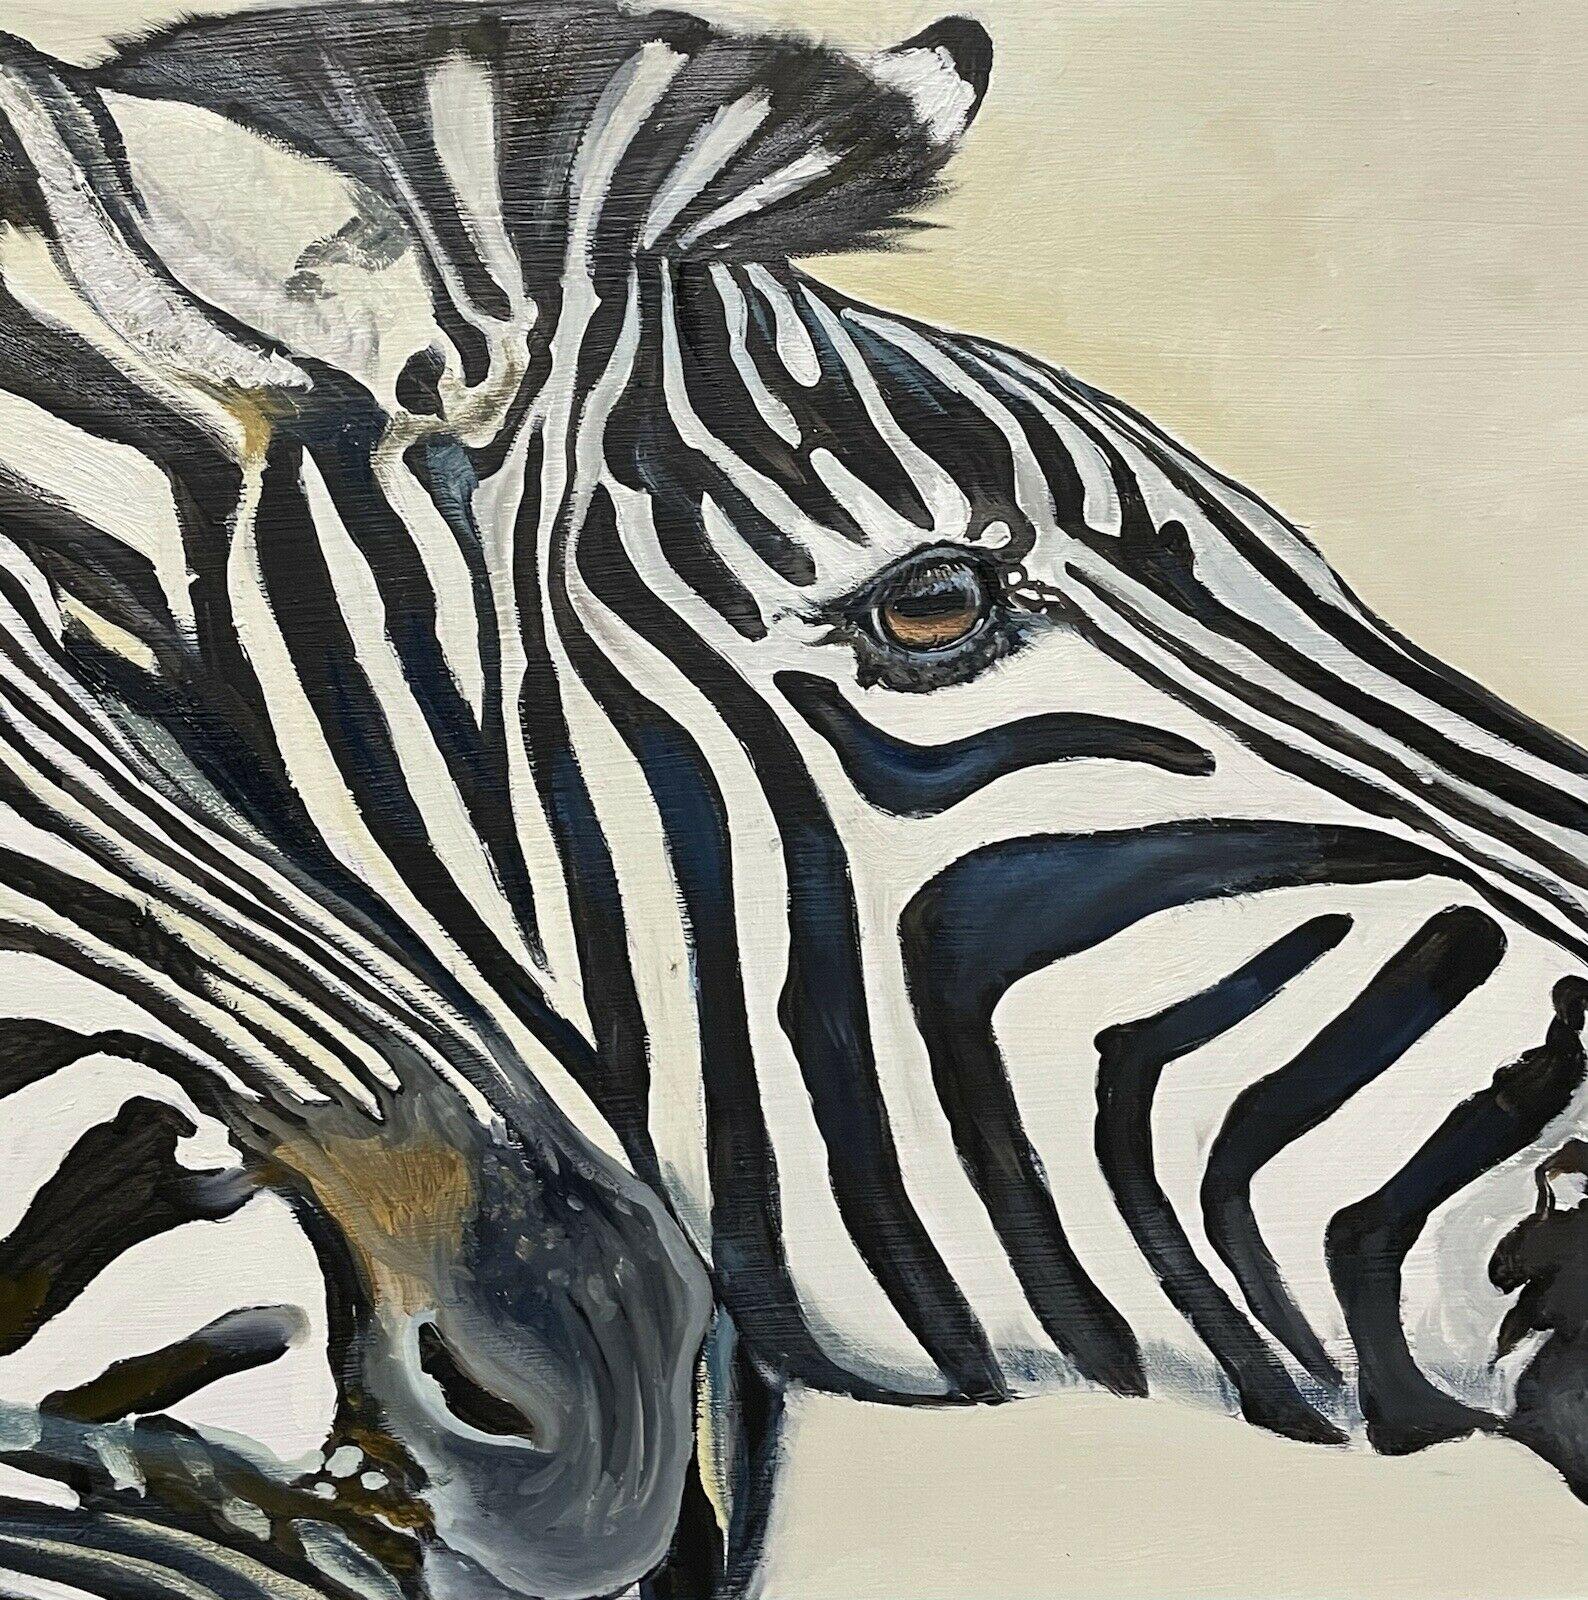 HUGE OIL PAINTING OF TWO ZEBRAS - BY CLIVE FREDRIKSSON - FRAMED & STUNNING - Black Animal Painting by Clive Fredriksson